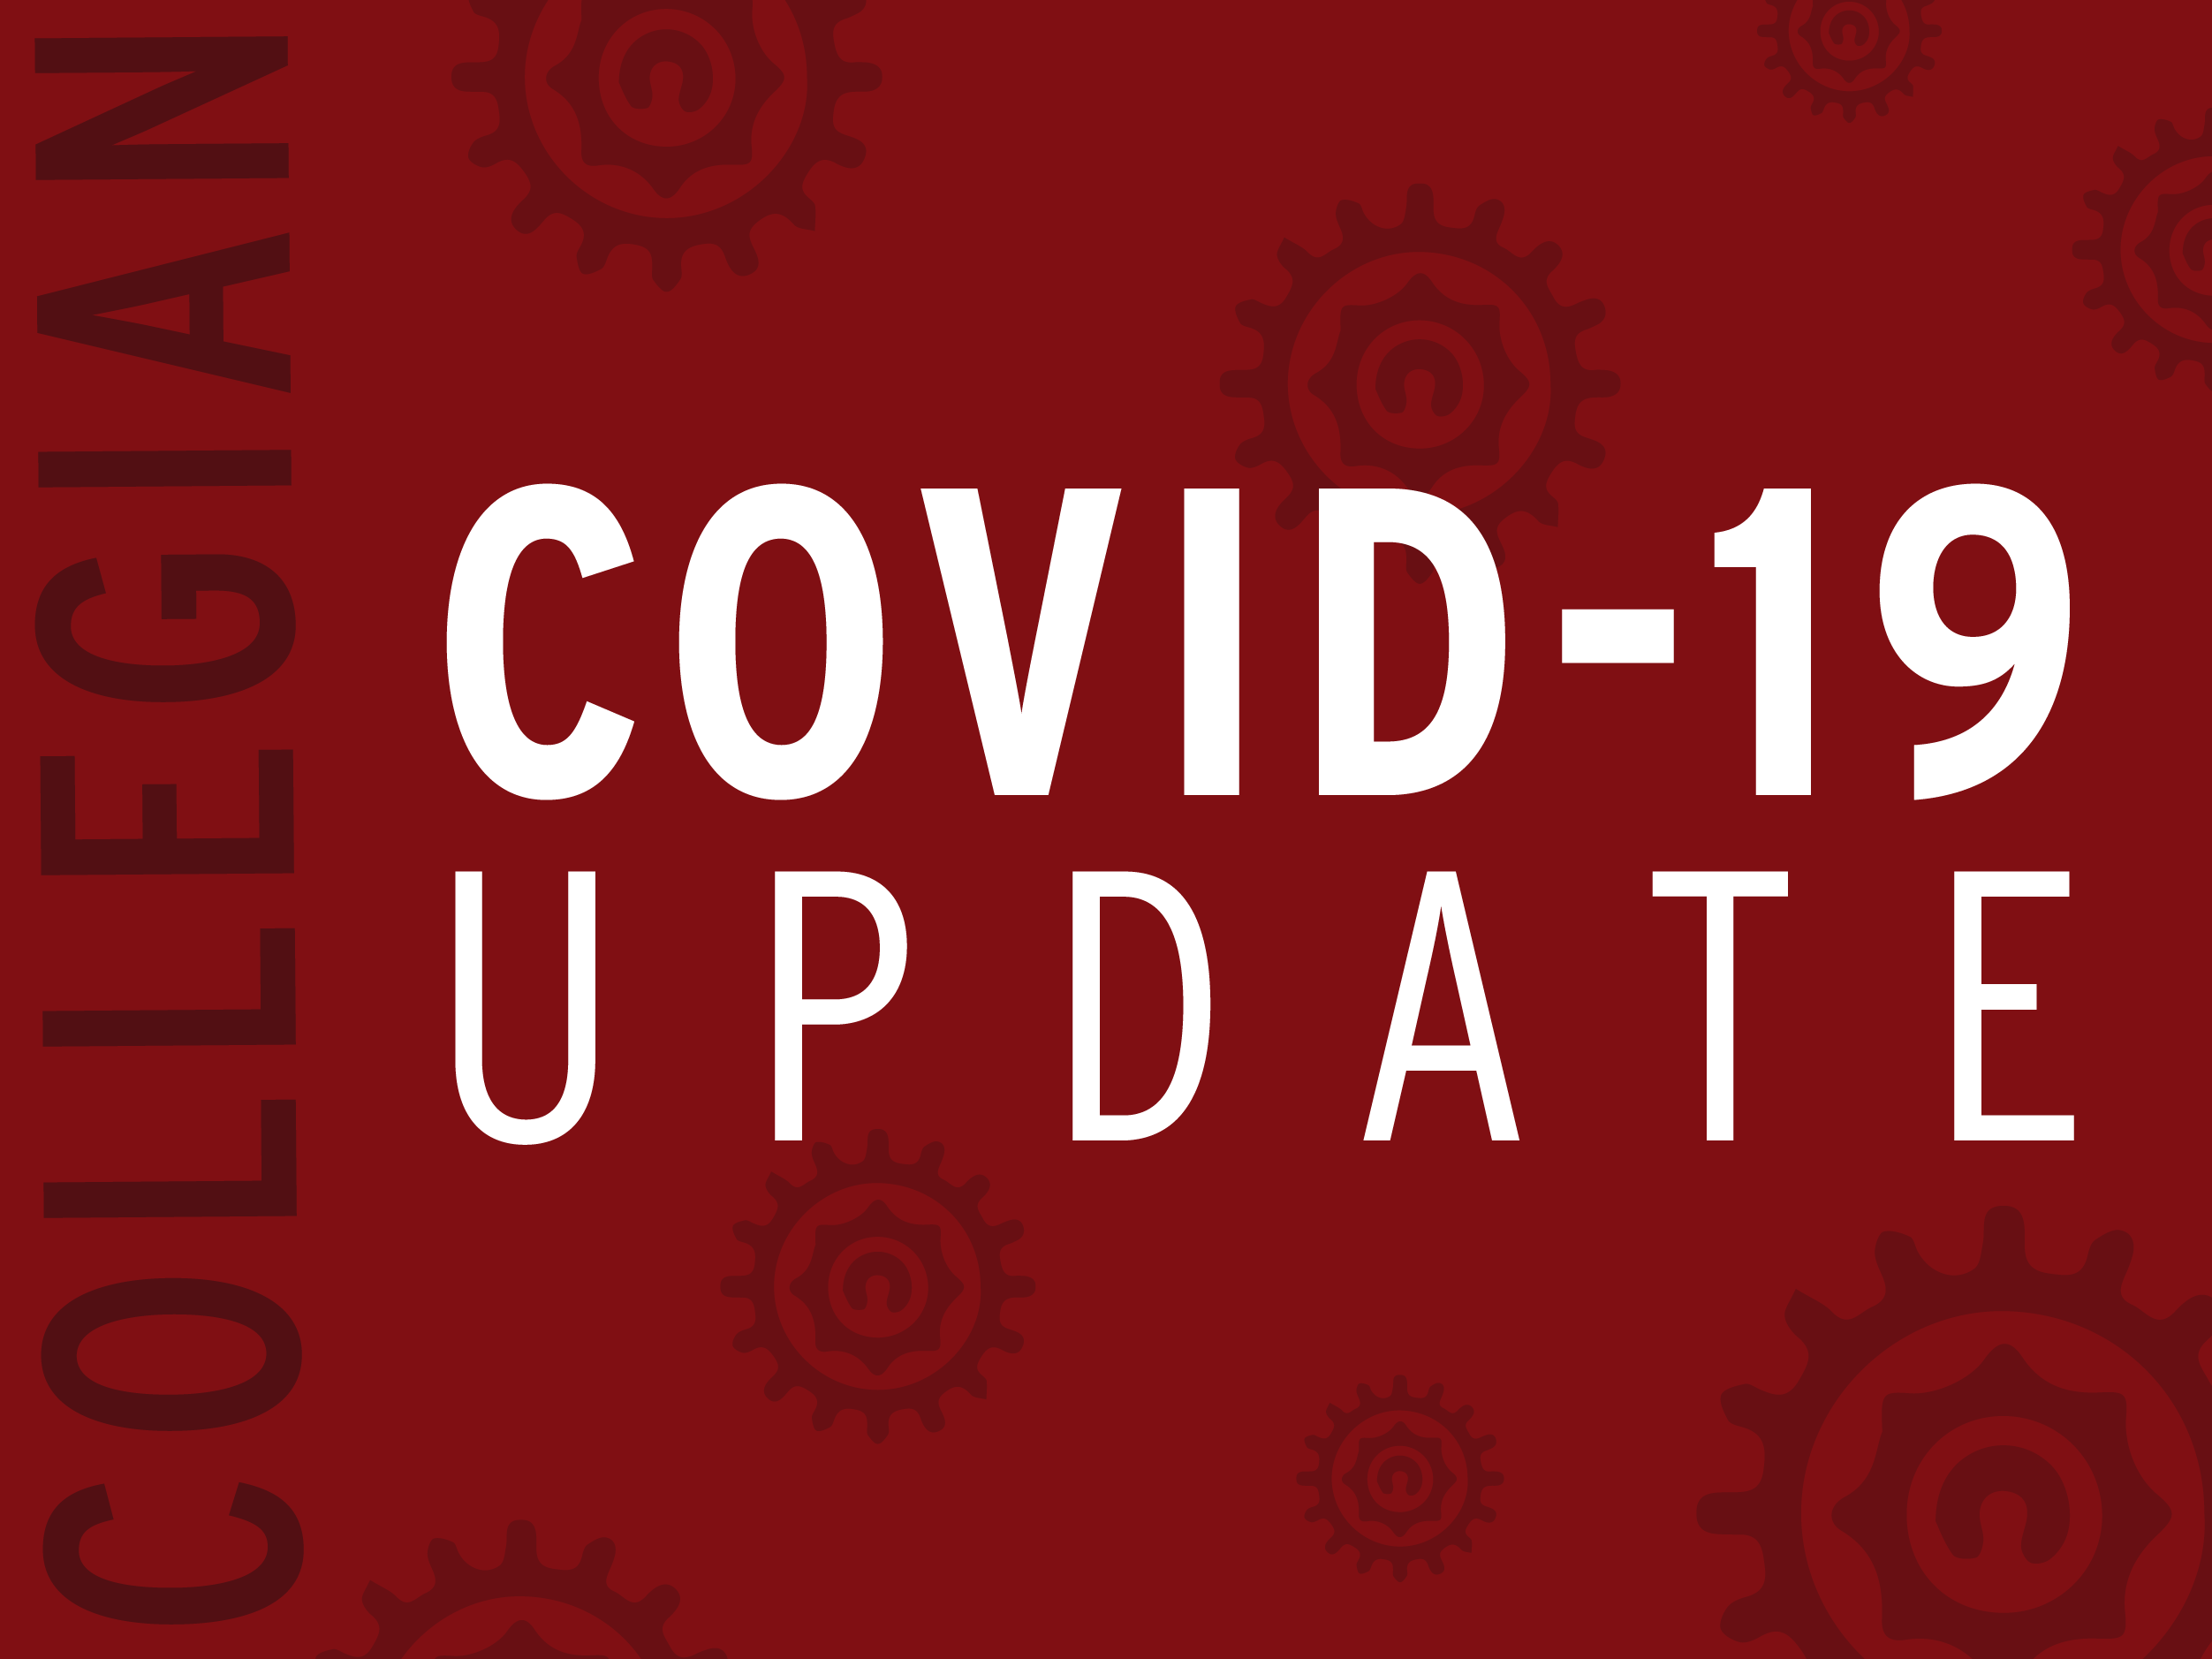 text that reads "COVID-19 Update" on red background